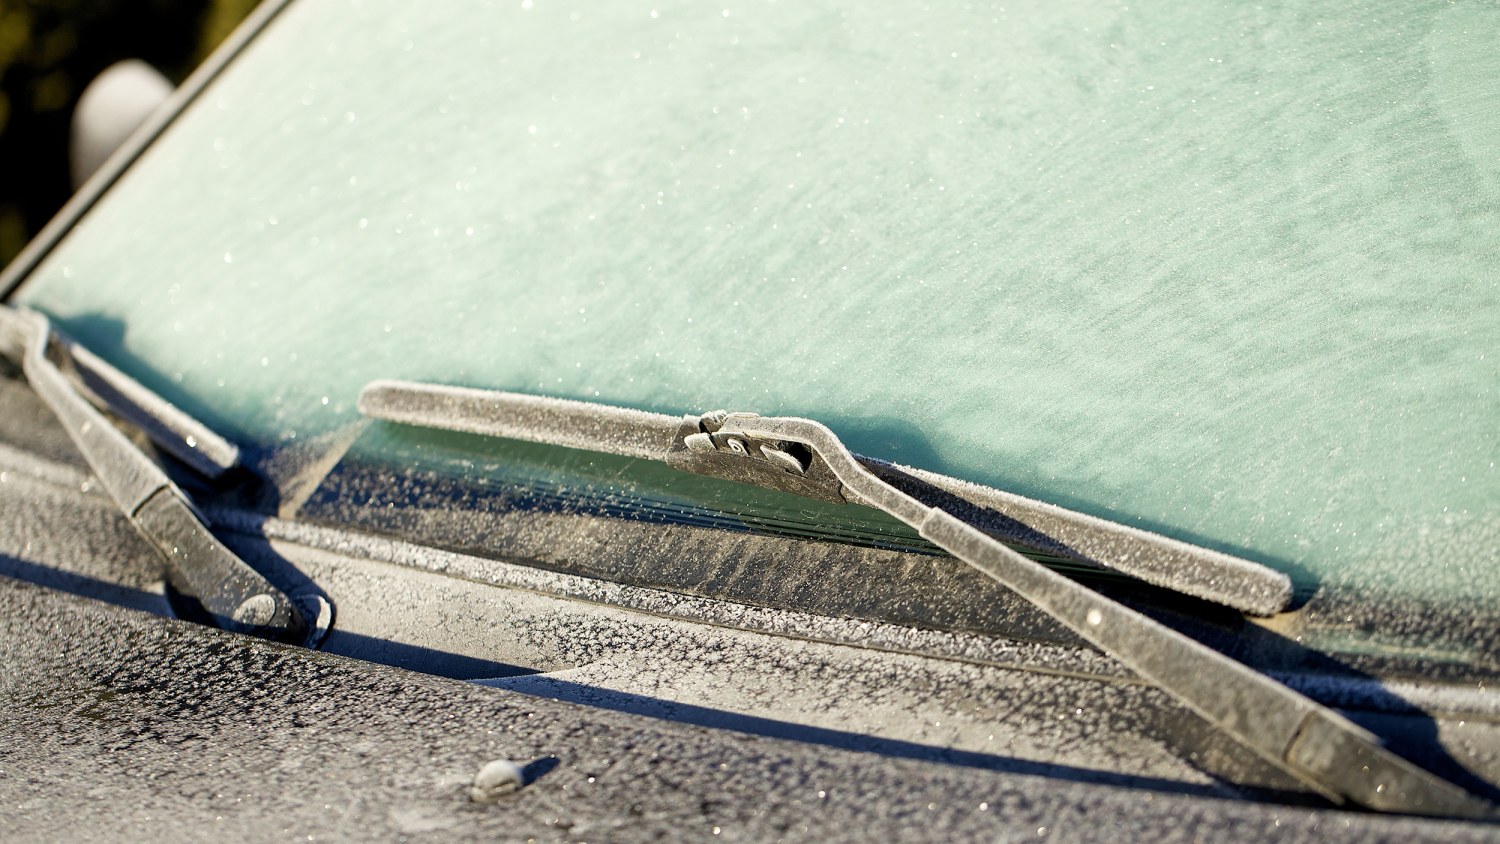 4 Settings to Defrost Your Windshield Faster